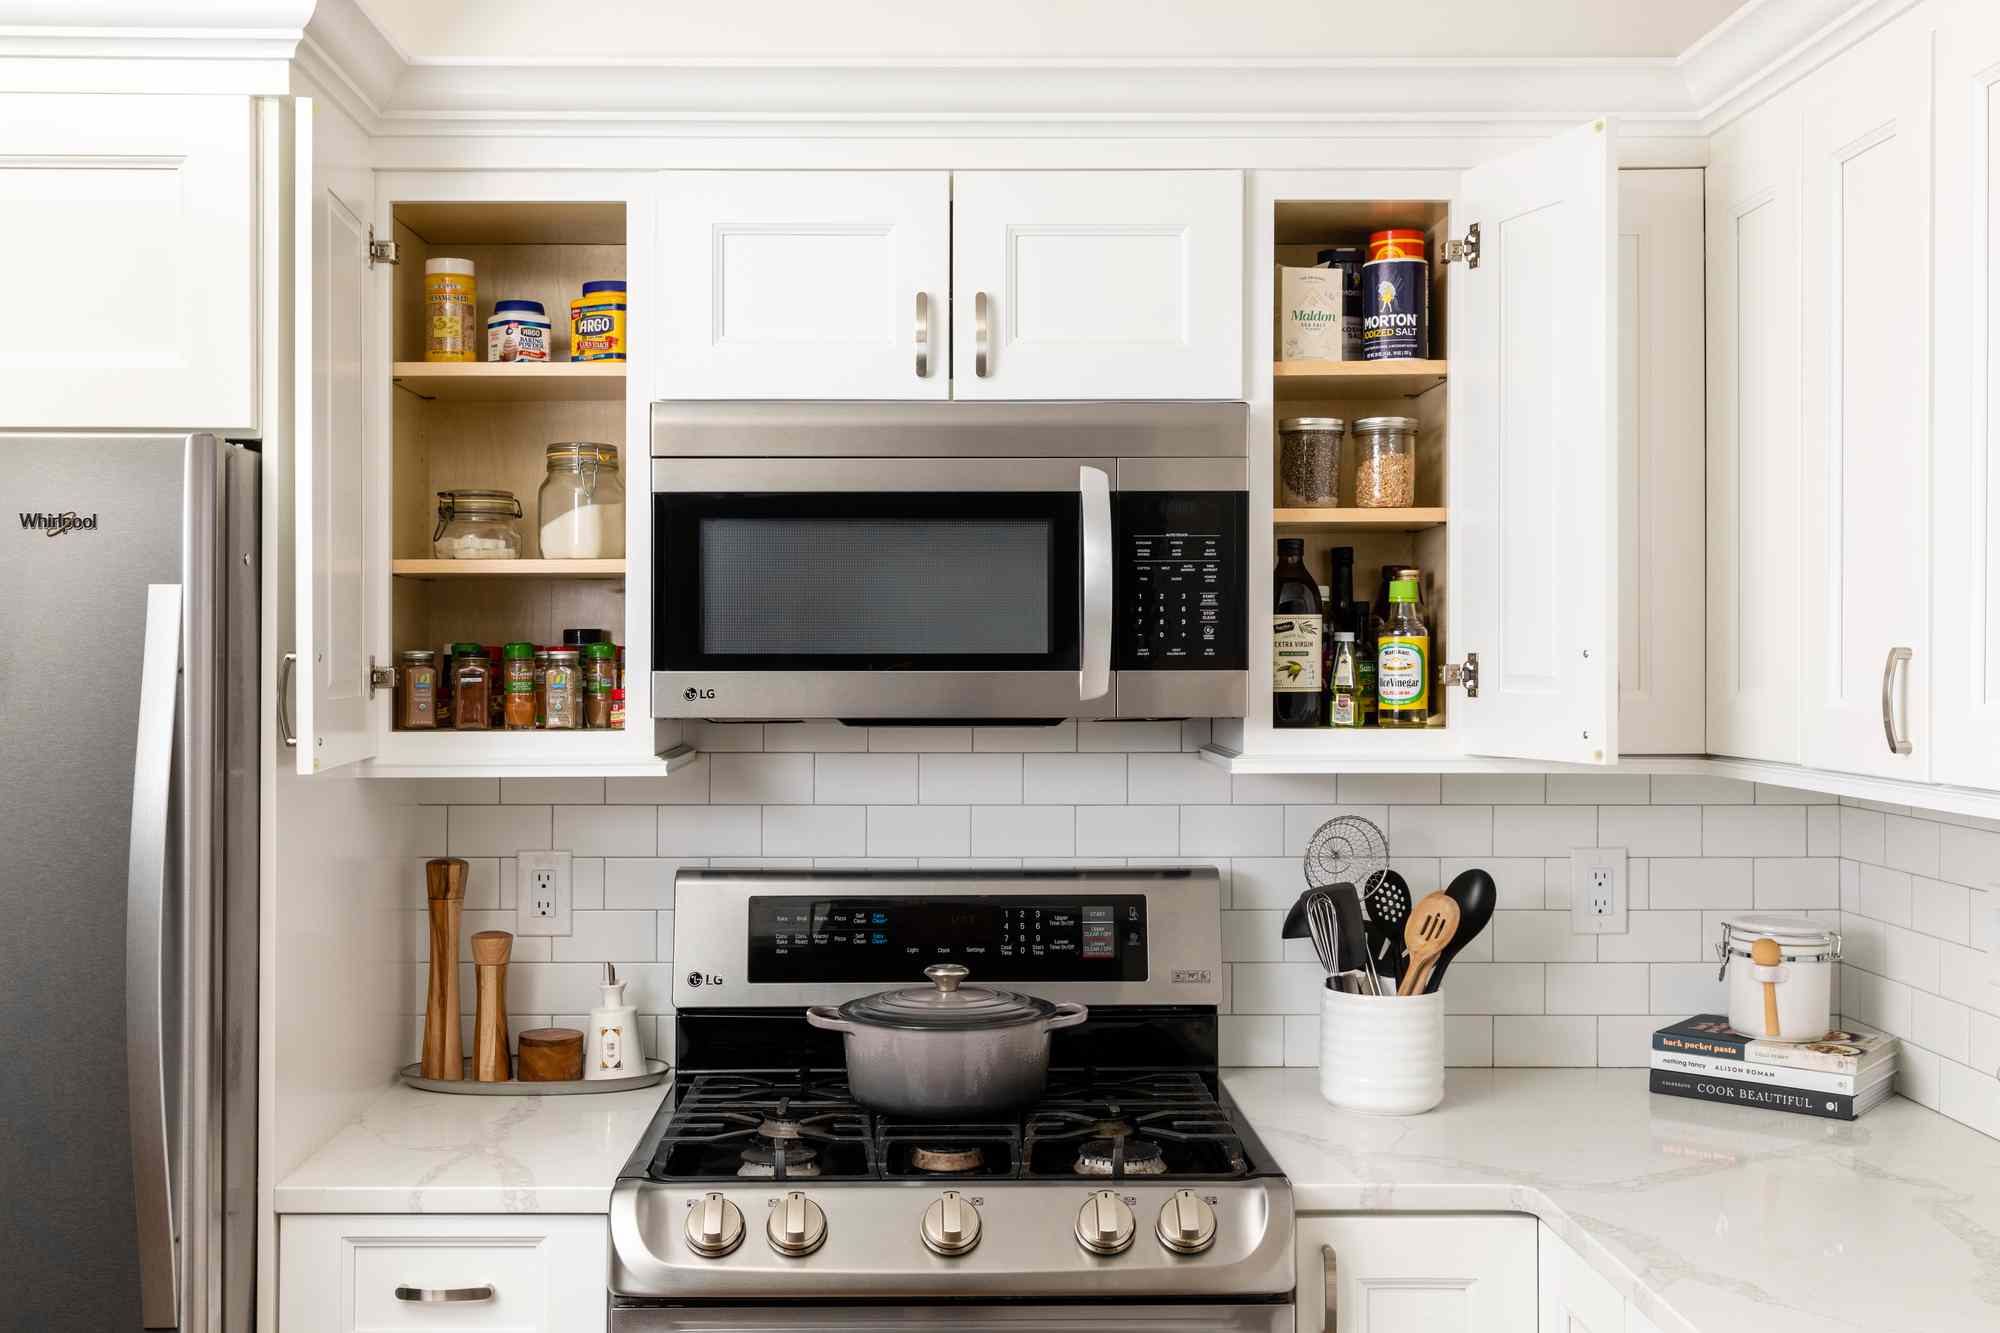 cabinets adjacent to the stove with items used most frequently